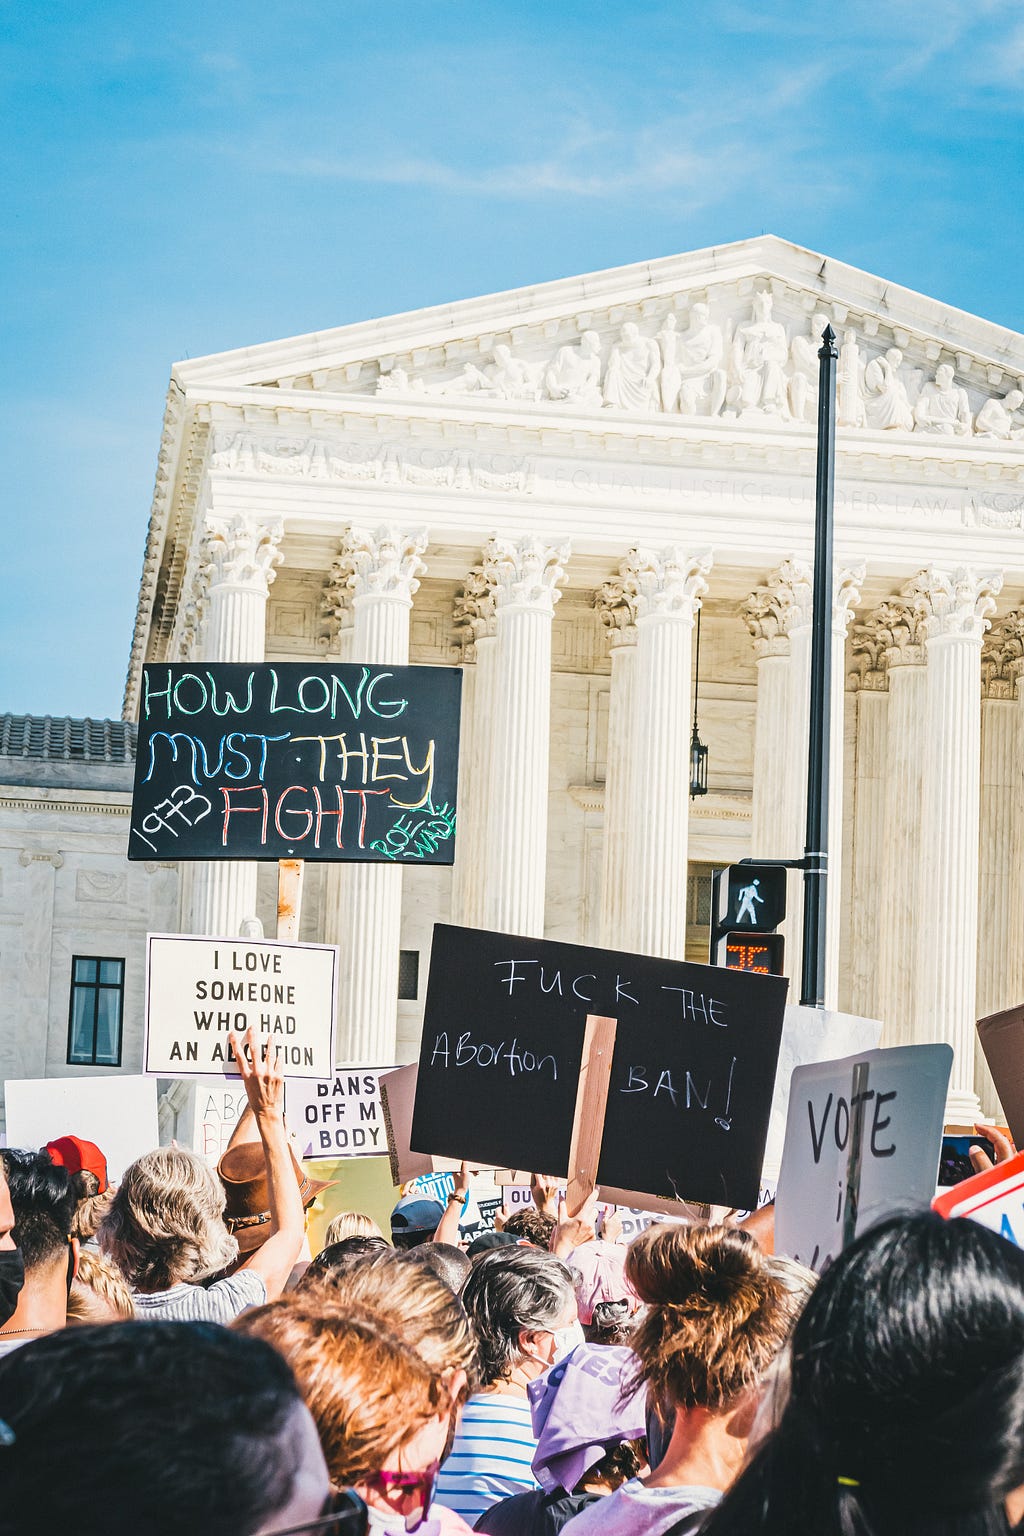 Image of protestors in front of the Supreme Court with signs reading “How long must they fight. Roe Wade,” “Fuck the abortion ban,” and “I love someone who had an abortion.”